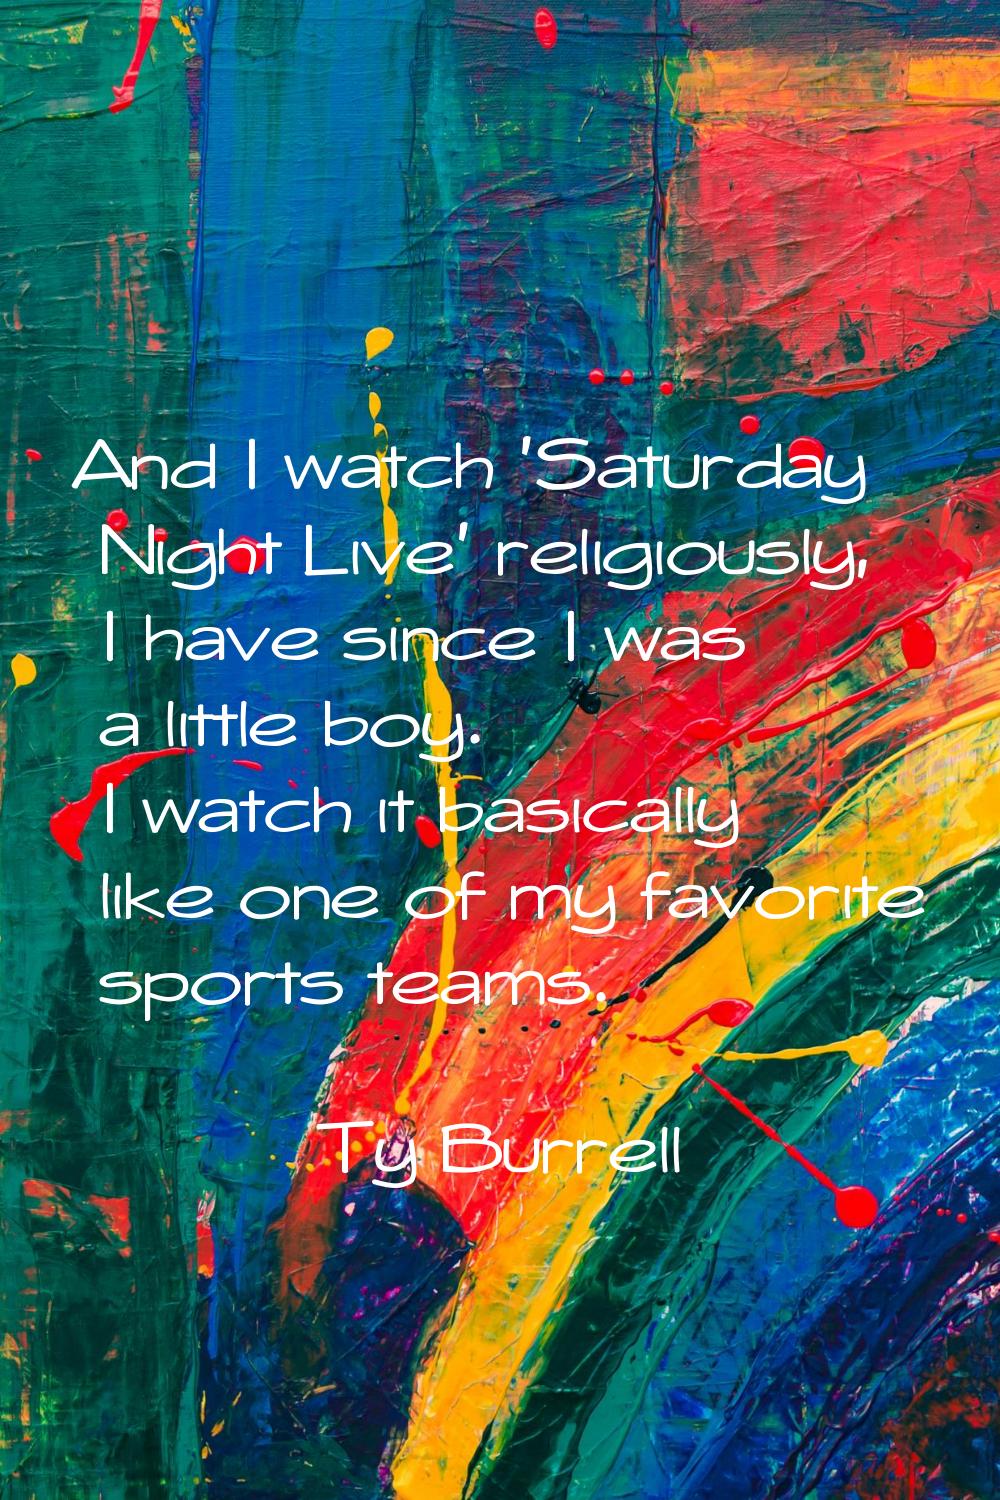 And I watch 'Saturday Night Live' religiously, I have since I was a little boy. I watch it basicall